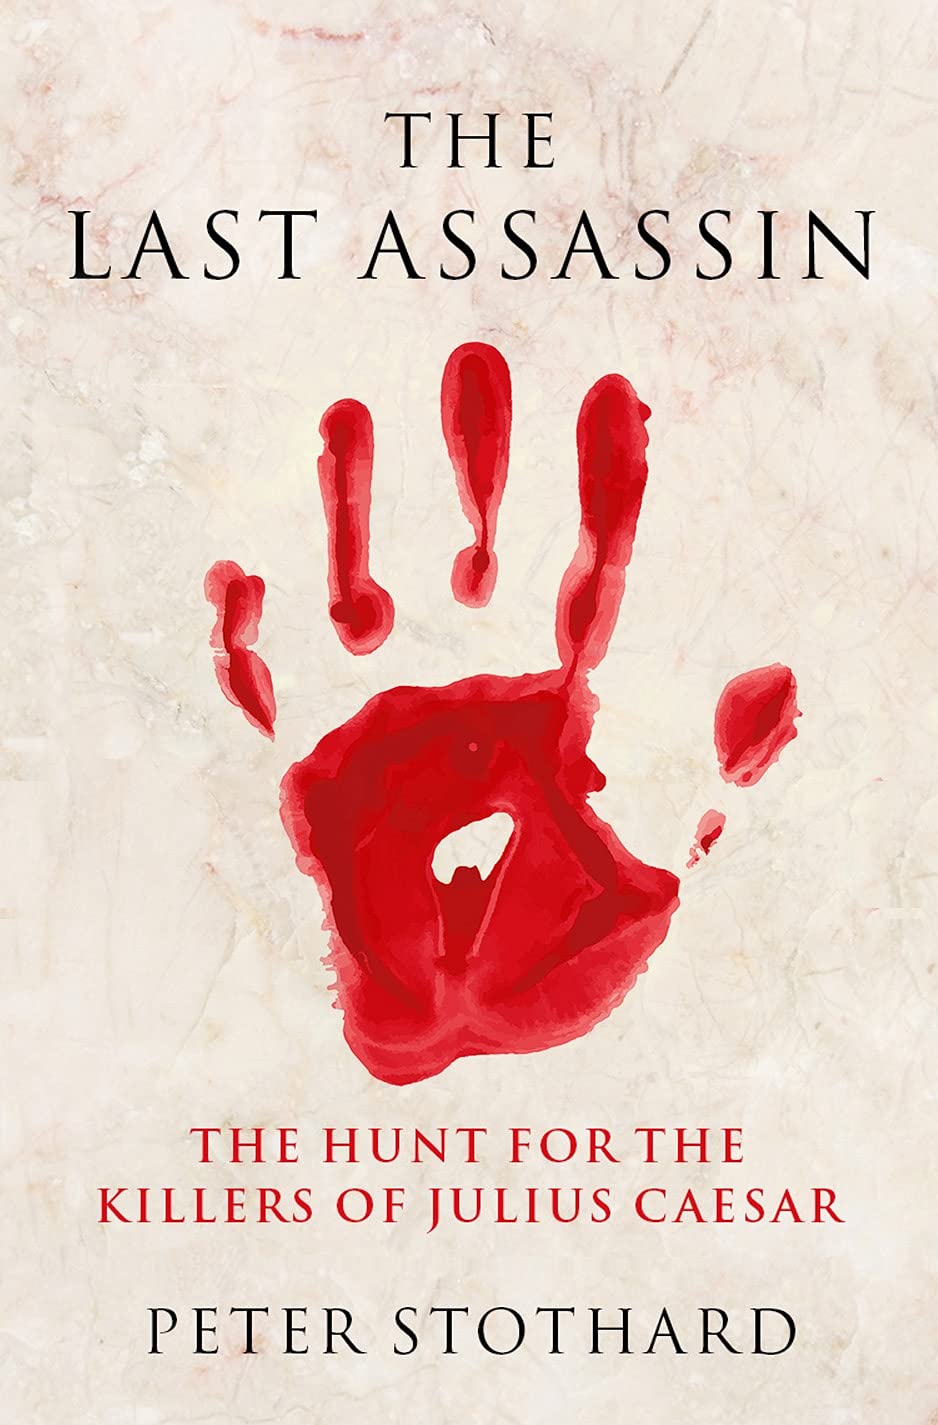 The Last Assassin: The Hunt For The Killers Of Julius Caesar